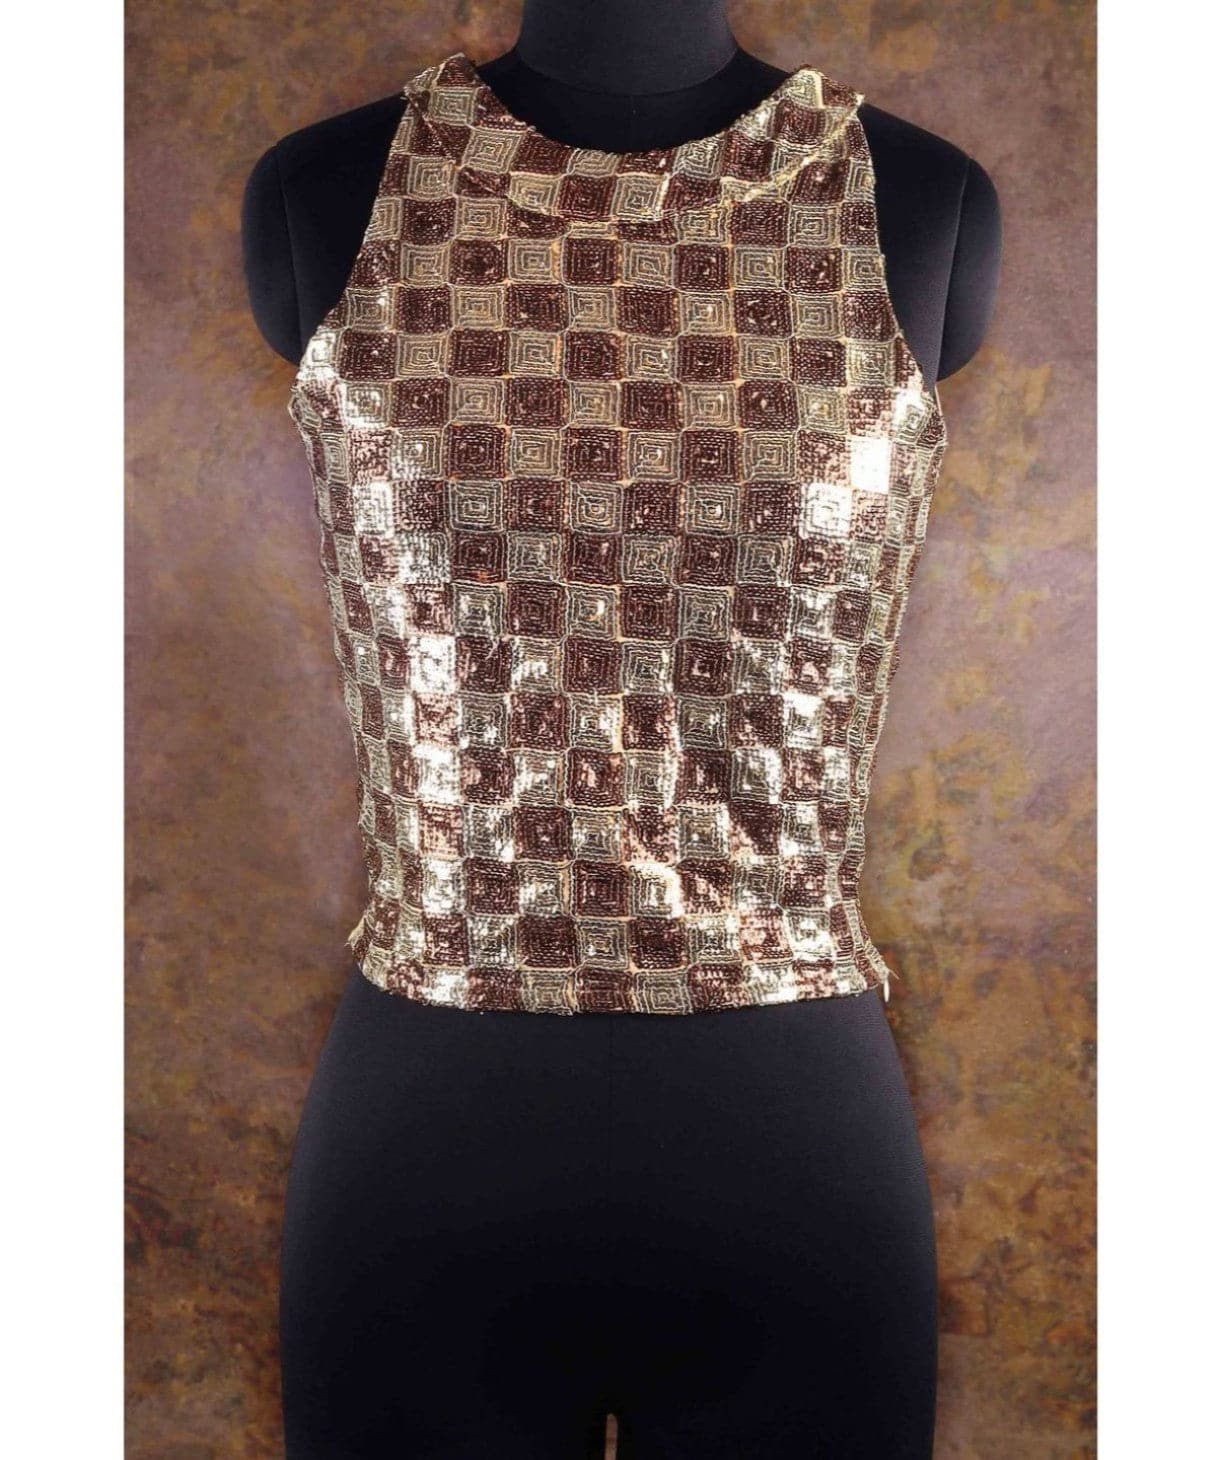 Uptownie X Pearl-Solid Gold Diamond Sequins Top - Uptownie